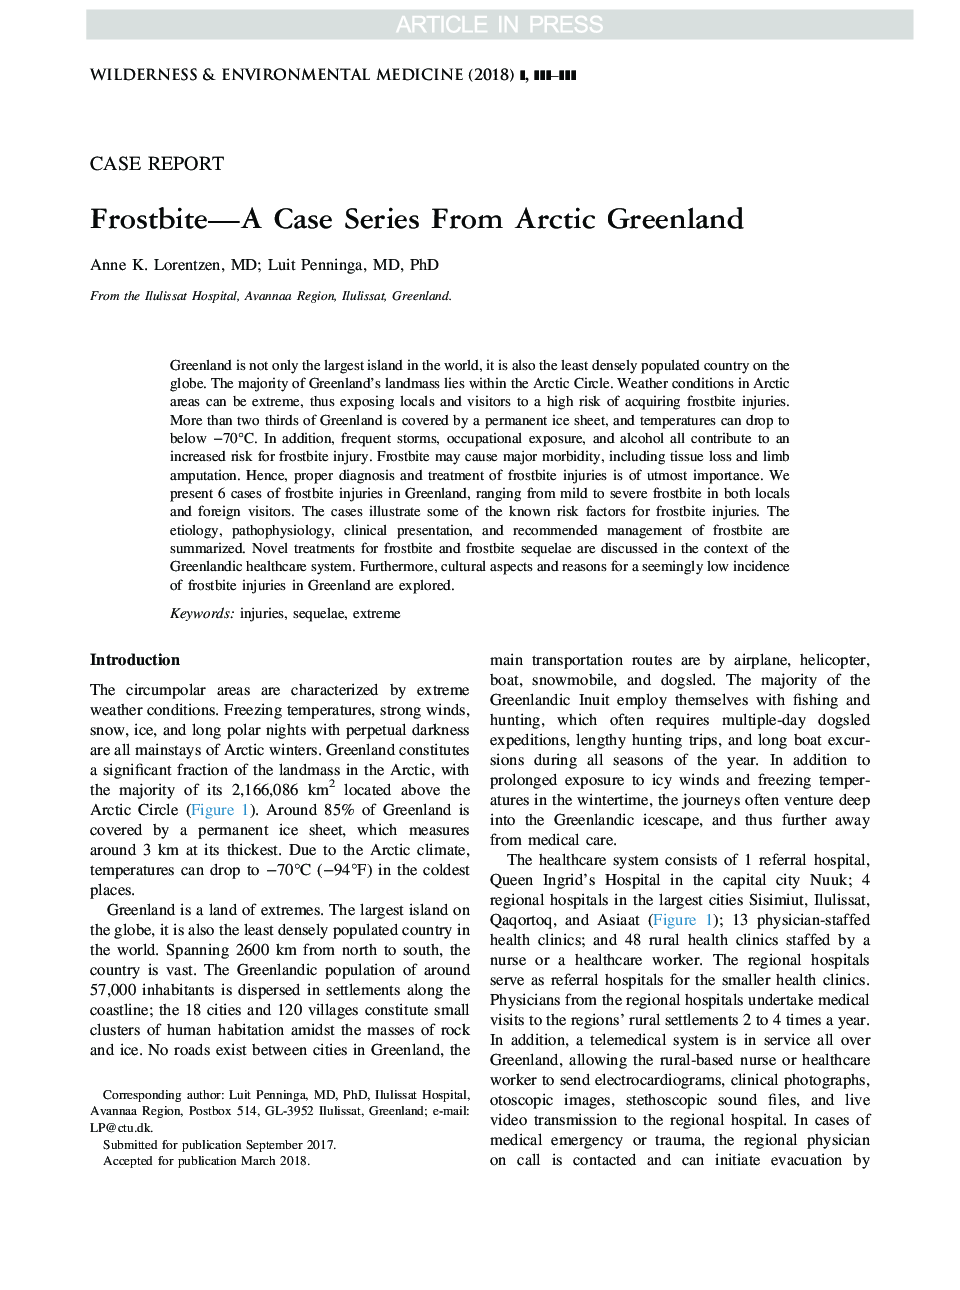 Frostbite-A Case Series From Arctic Greenland